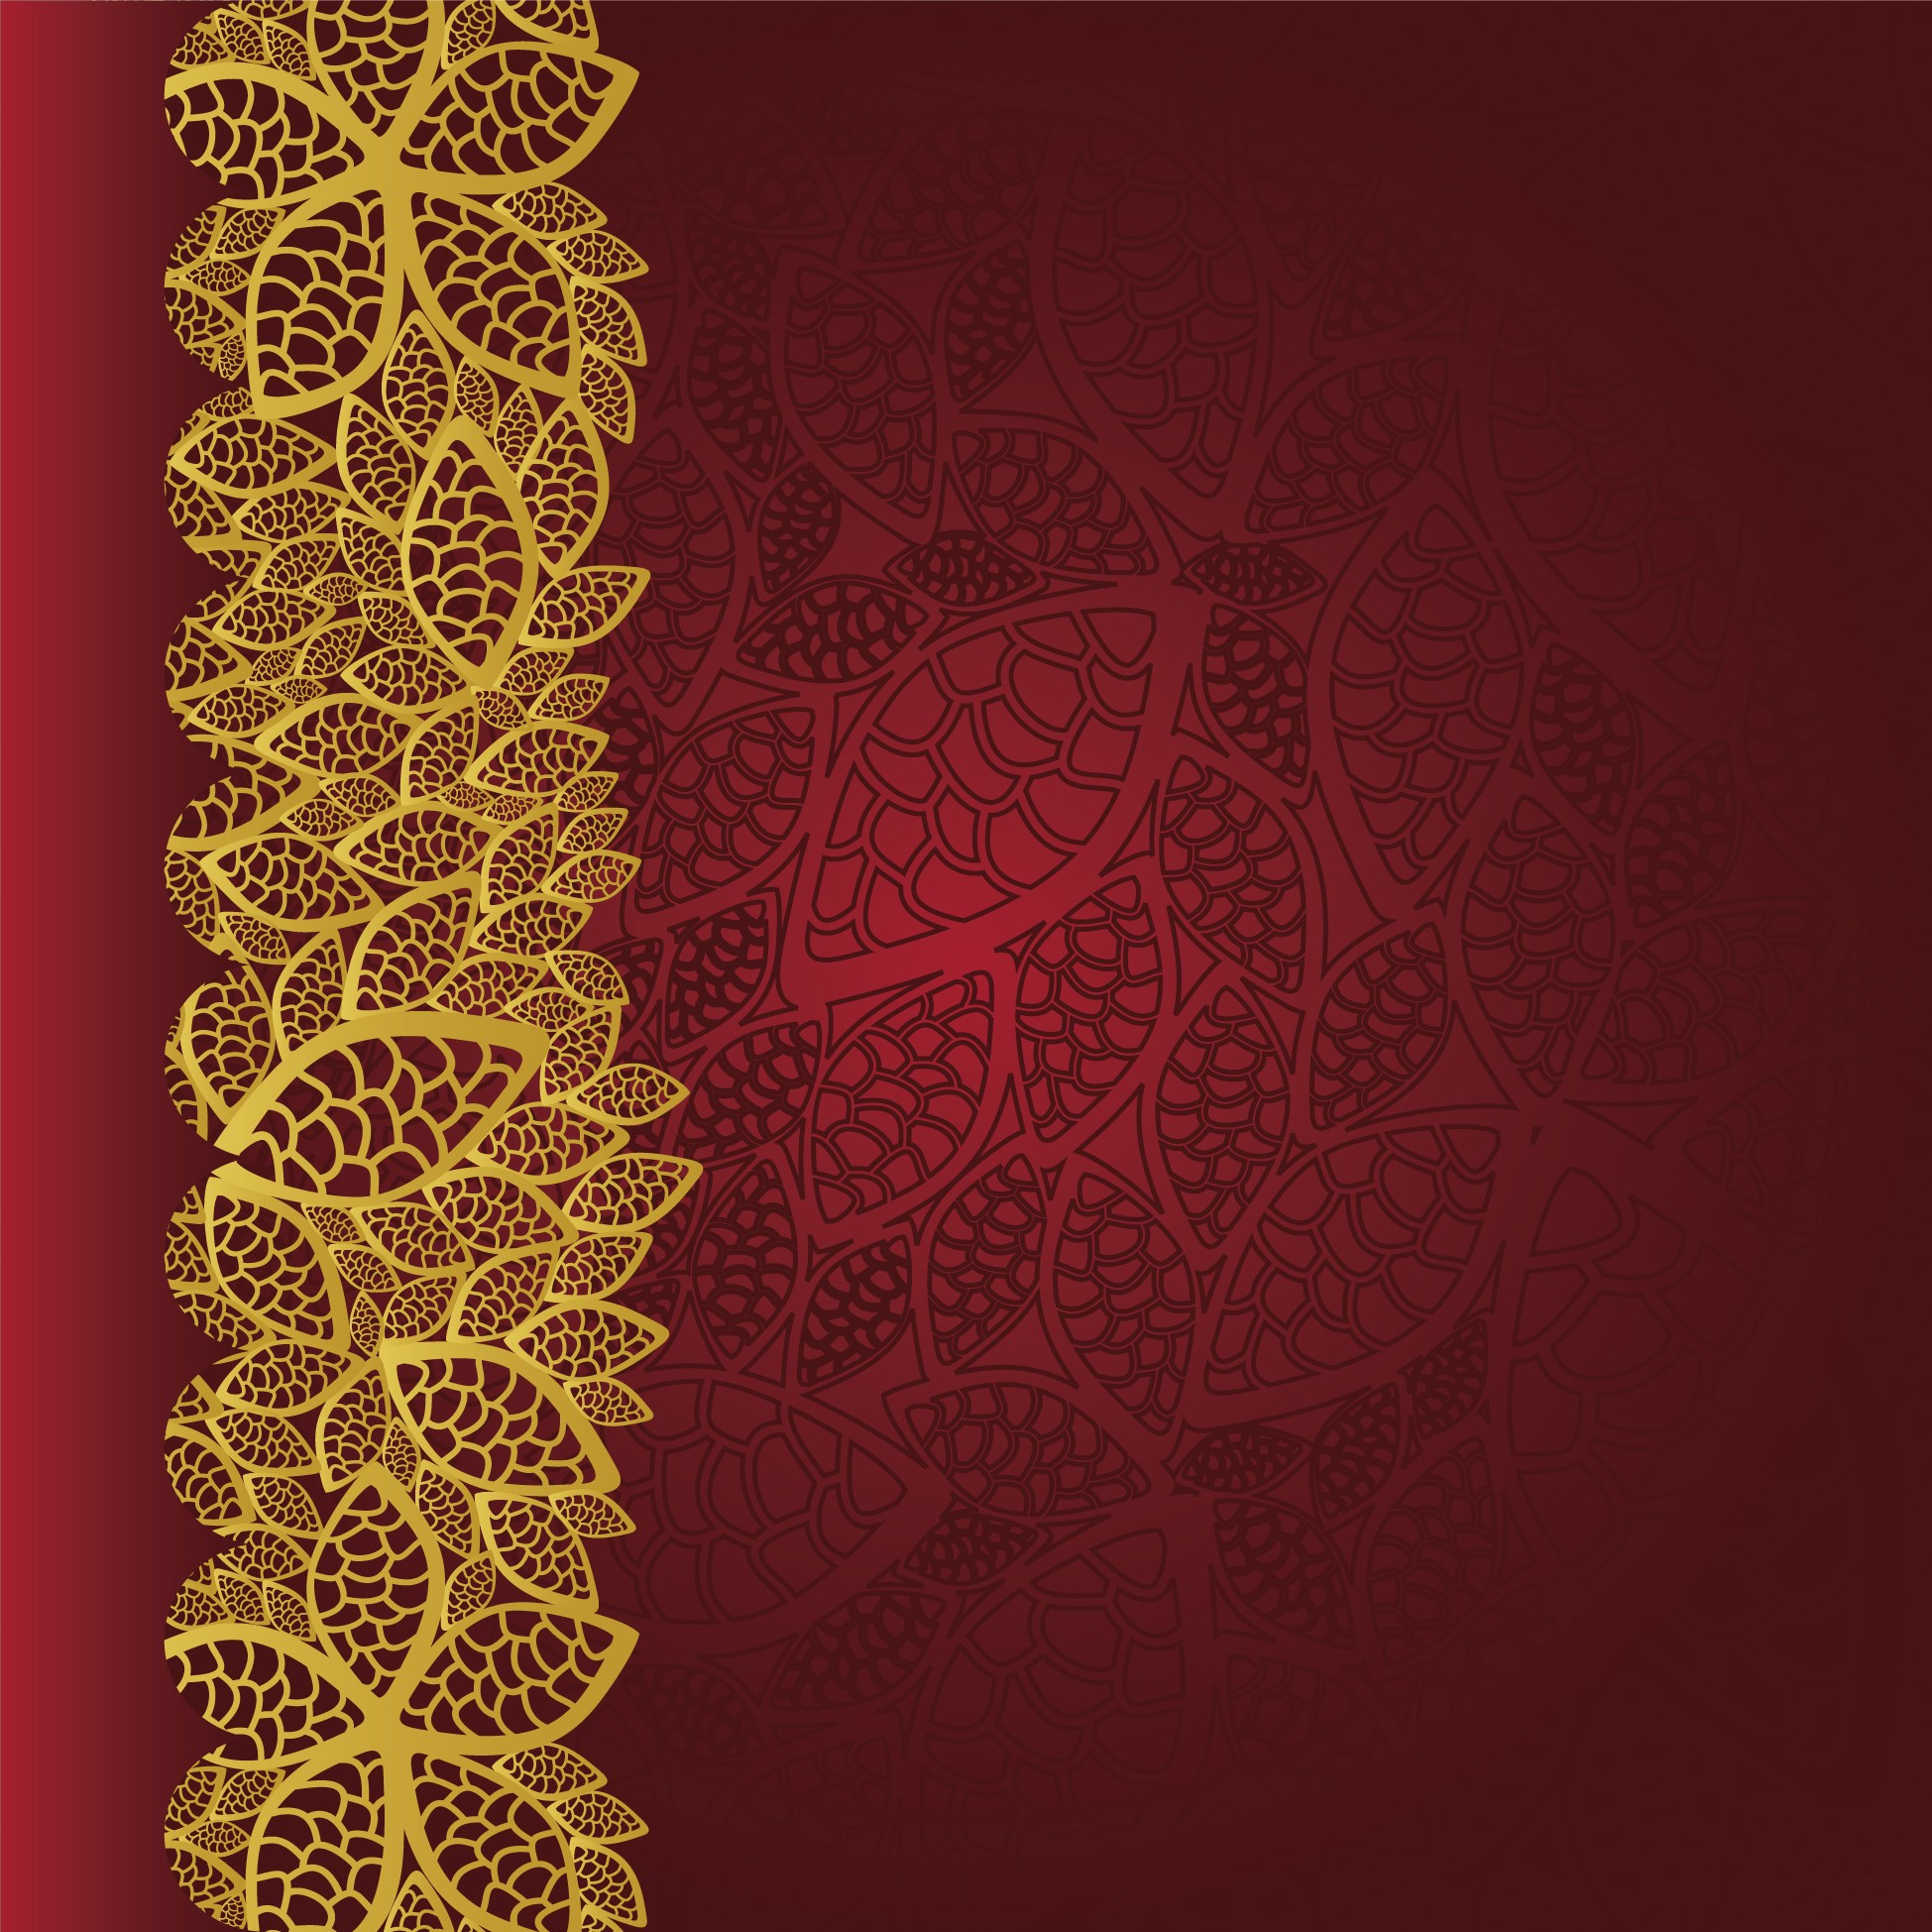 Red and Gold background ·① Download free awesome wallpapers for desktop